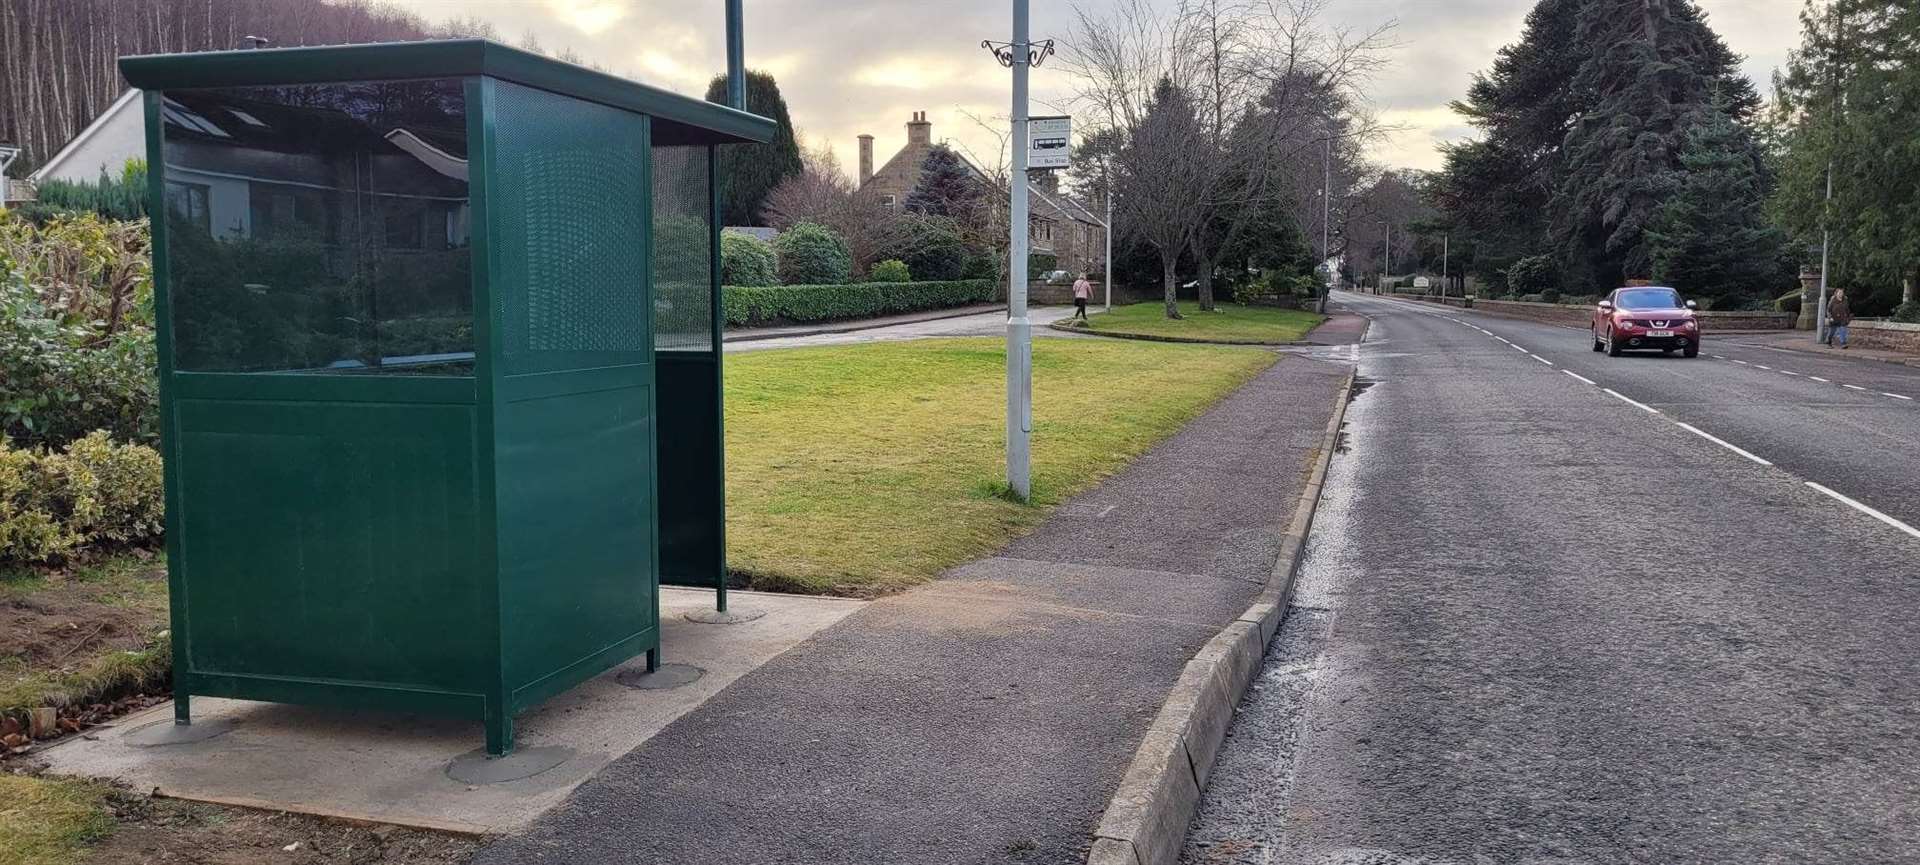 Passengers heading west from east Forres finally have a bus shelter.